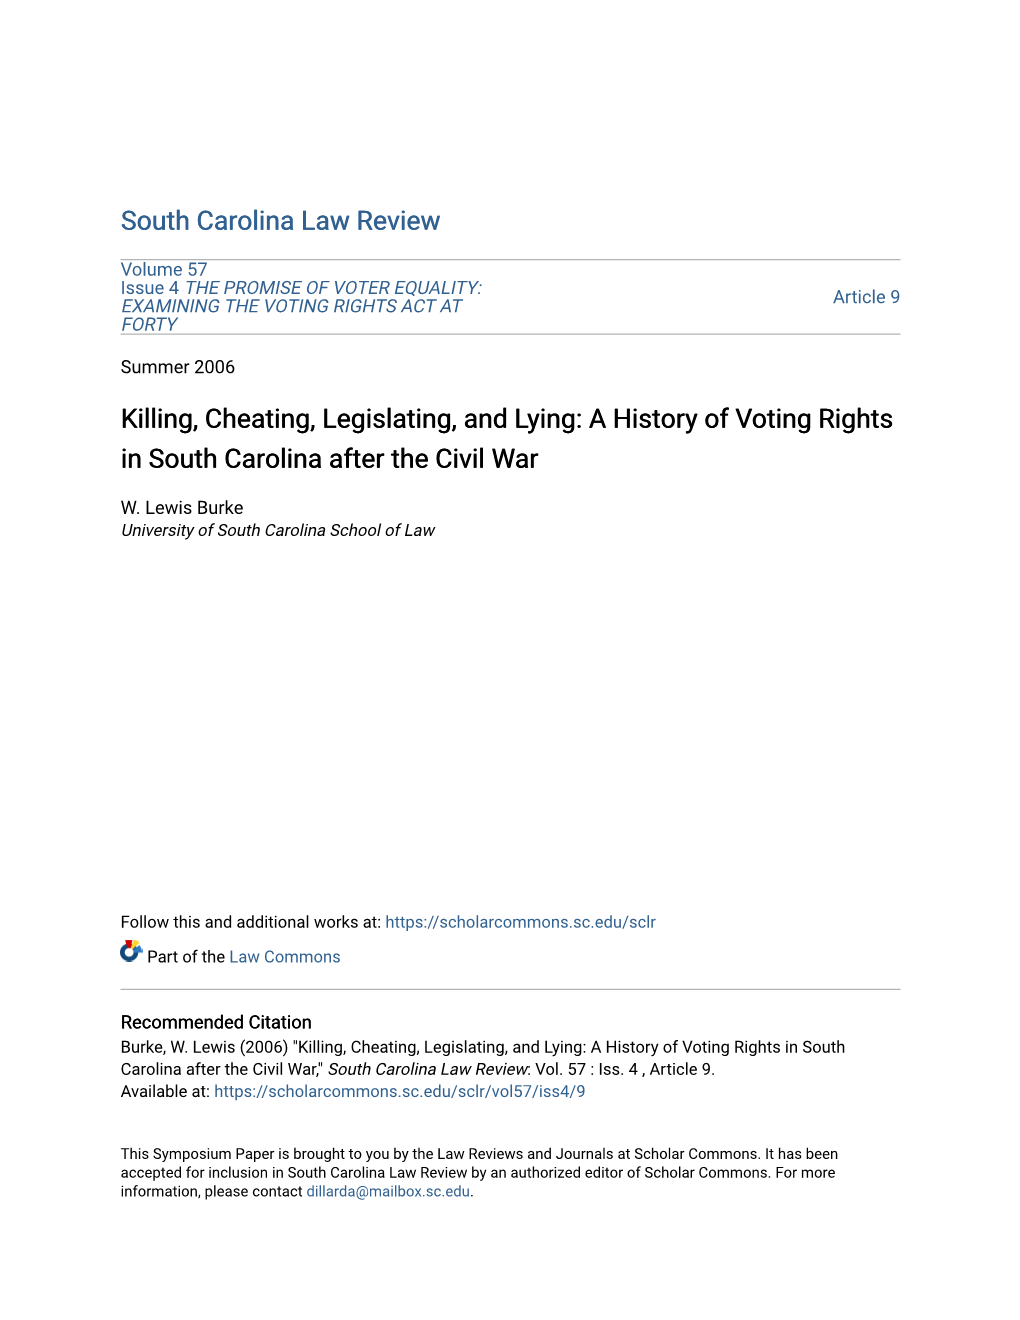 A History of Voting Rights in South Carolina After the Civil War